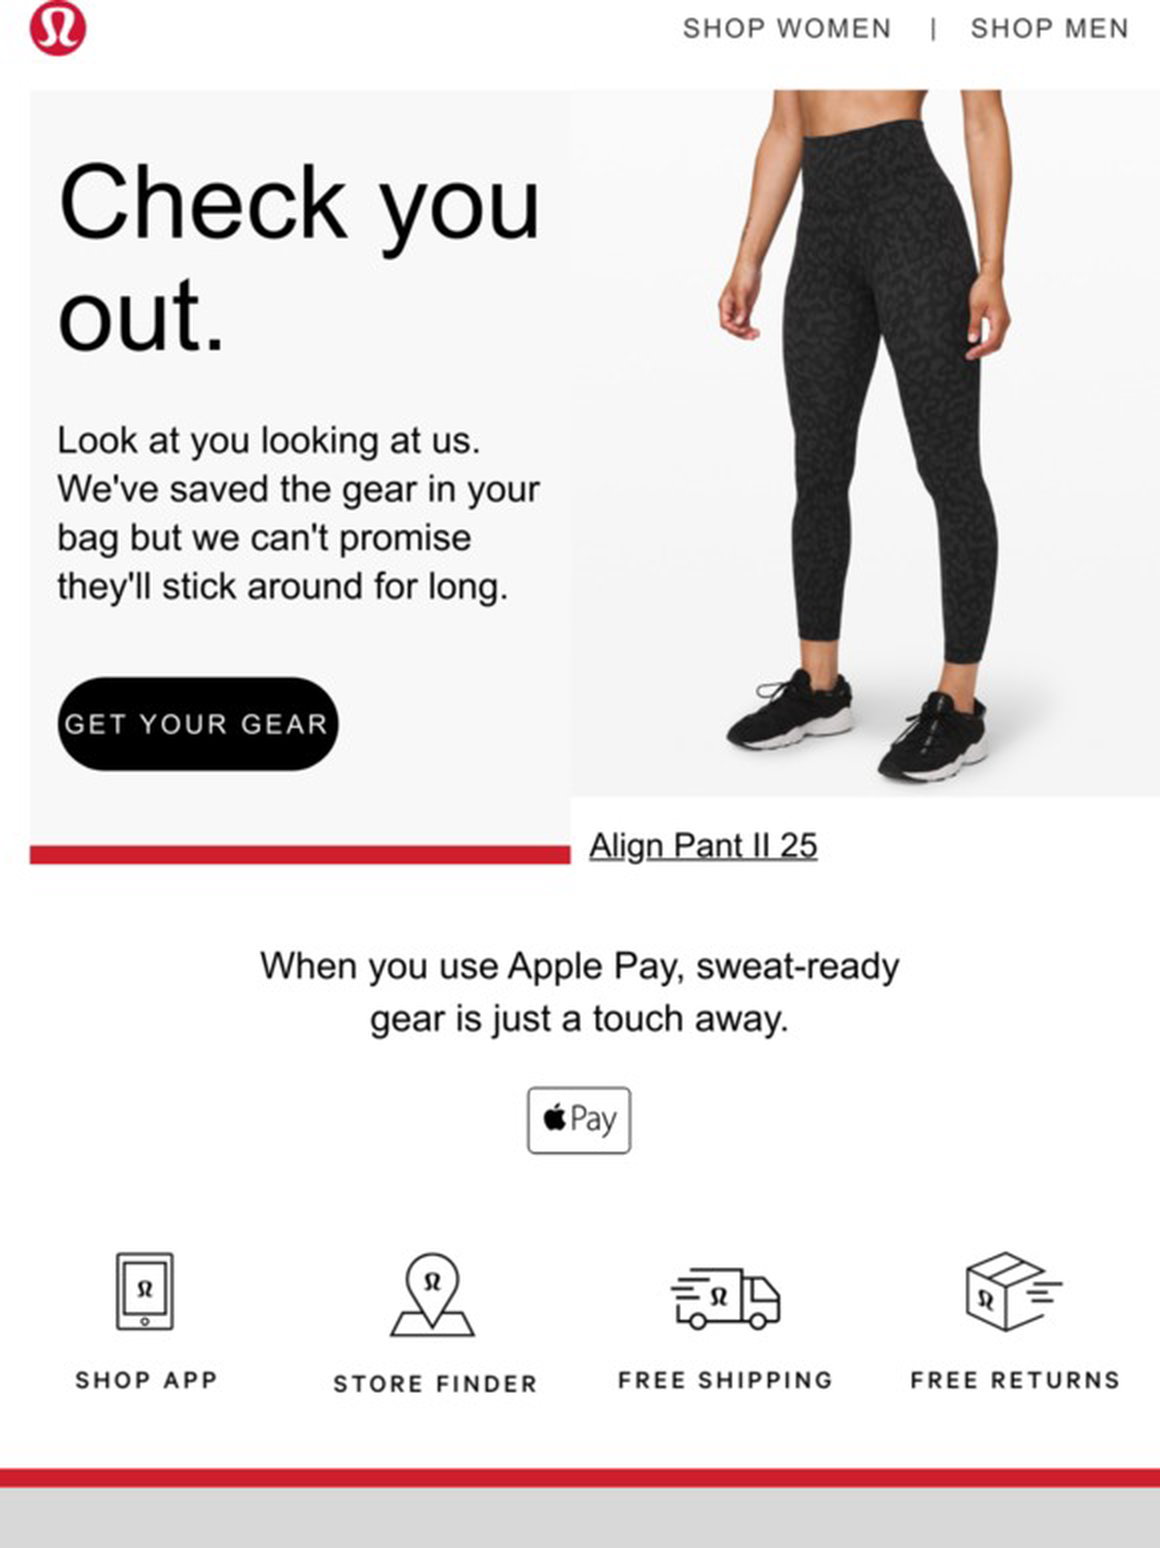 How To Put A Promo Code On Lululemon